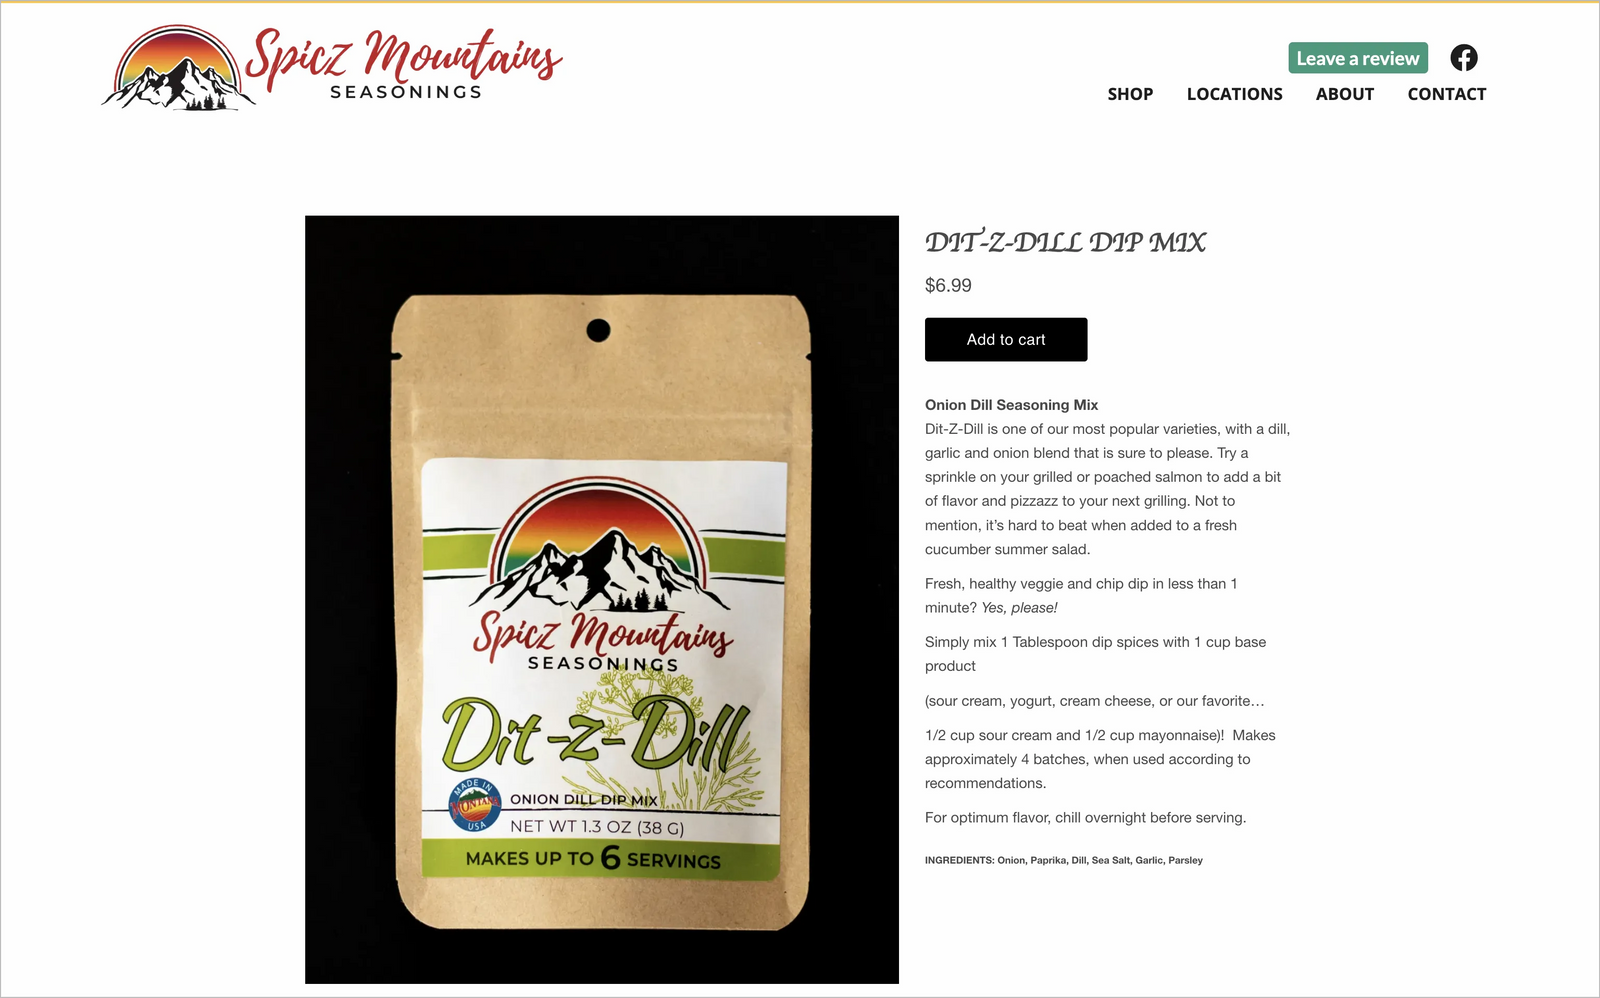 Product detail page for Dill Dip Mix on the Spciz Mountains website.